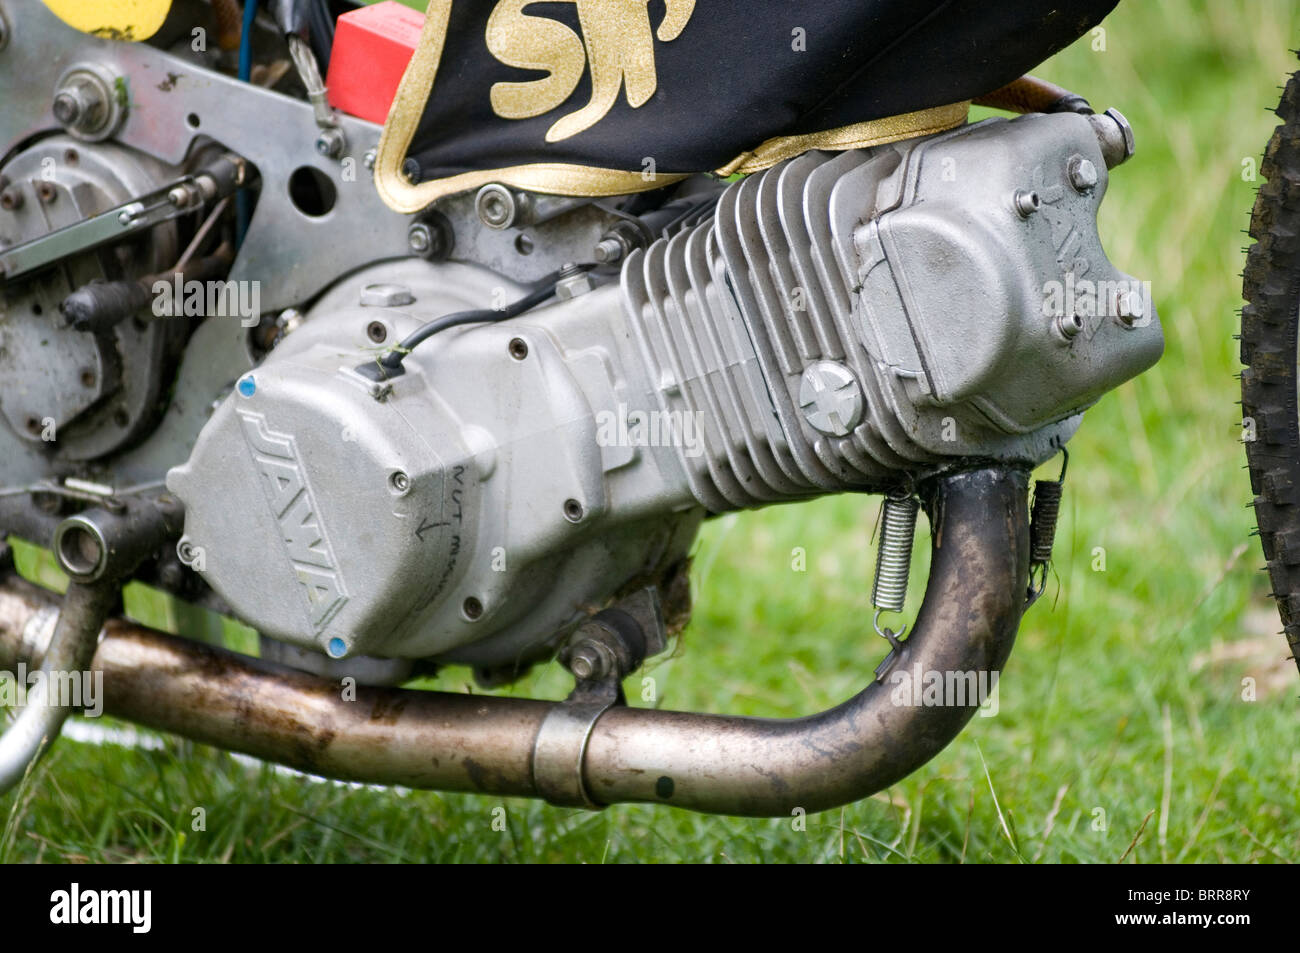 jawa speedway engine engines bike bikes motor motorcycle motorcycles race racing single cylinder exhaust pipe pipes air cooled c Stock Photo